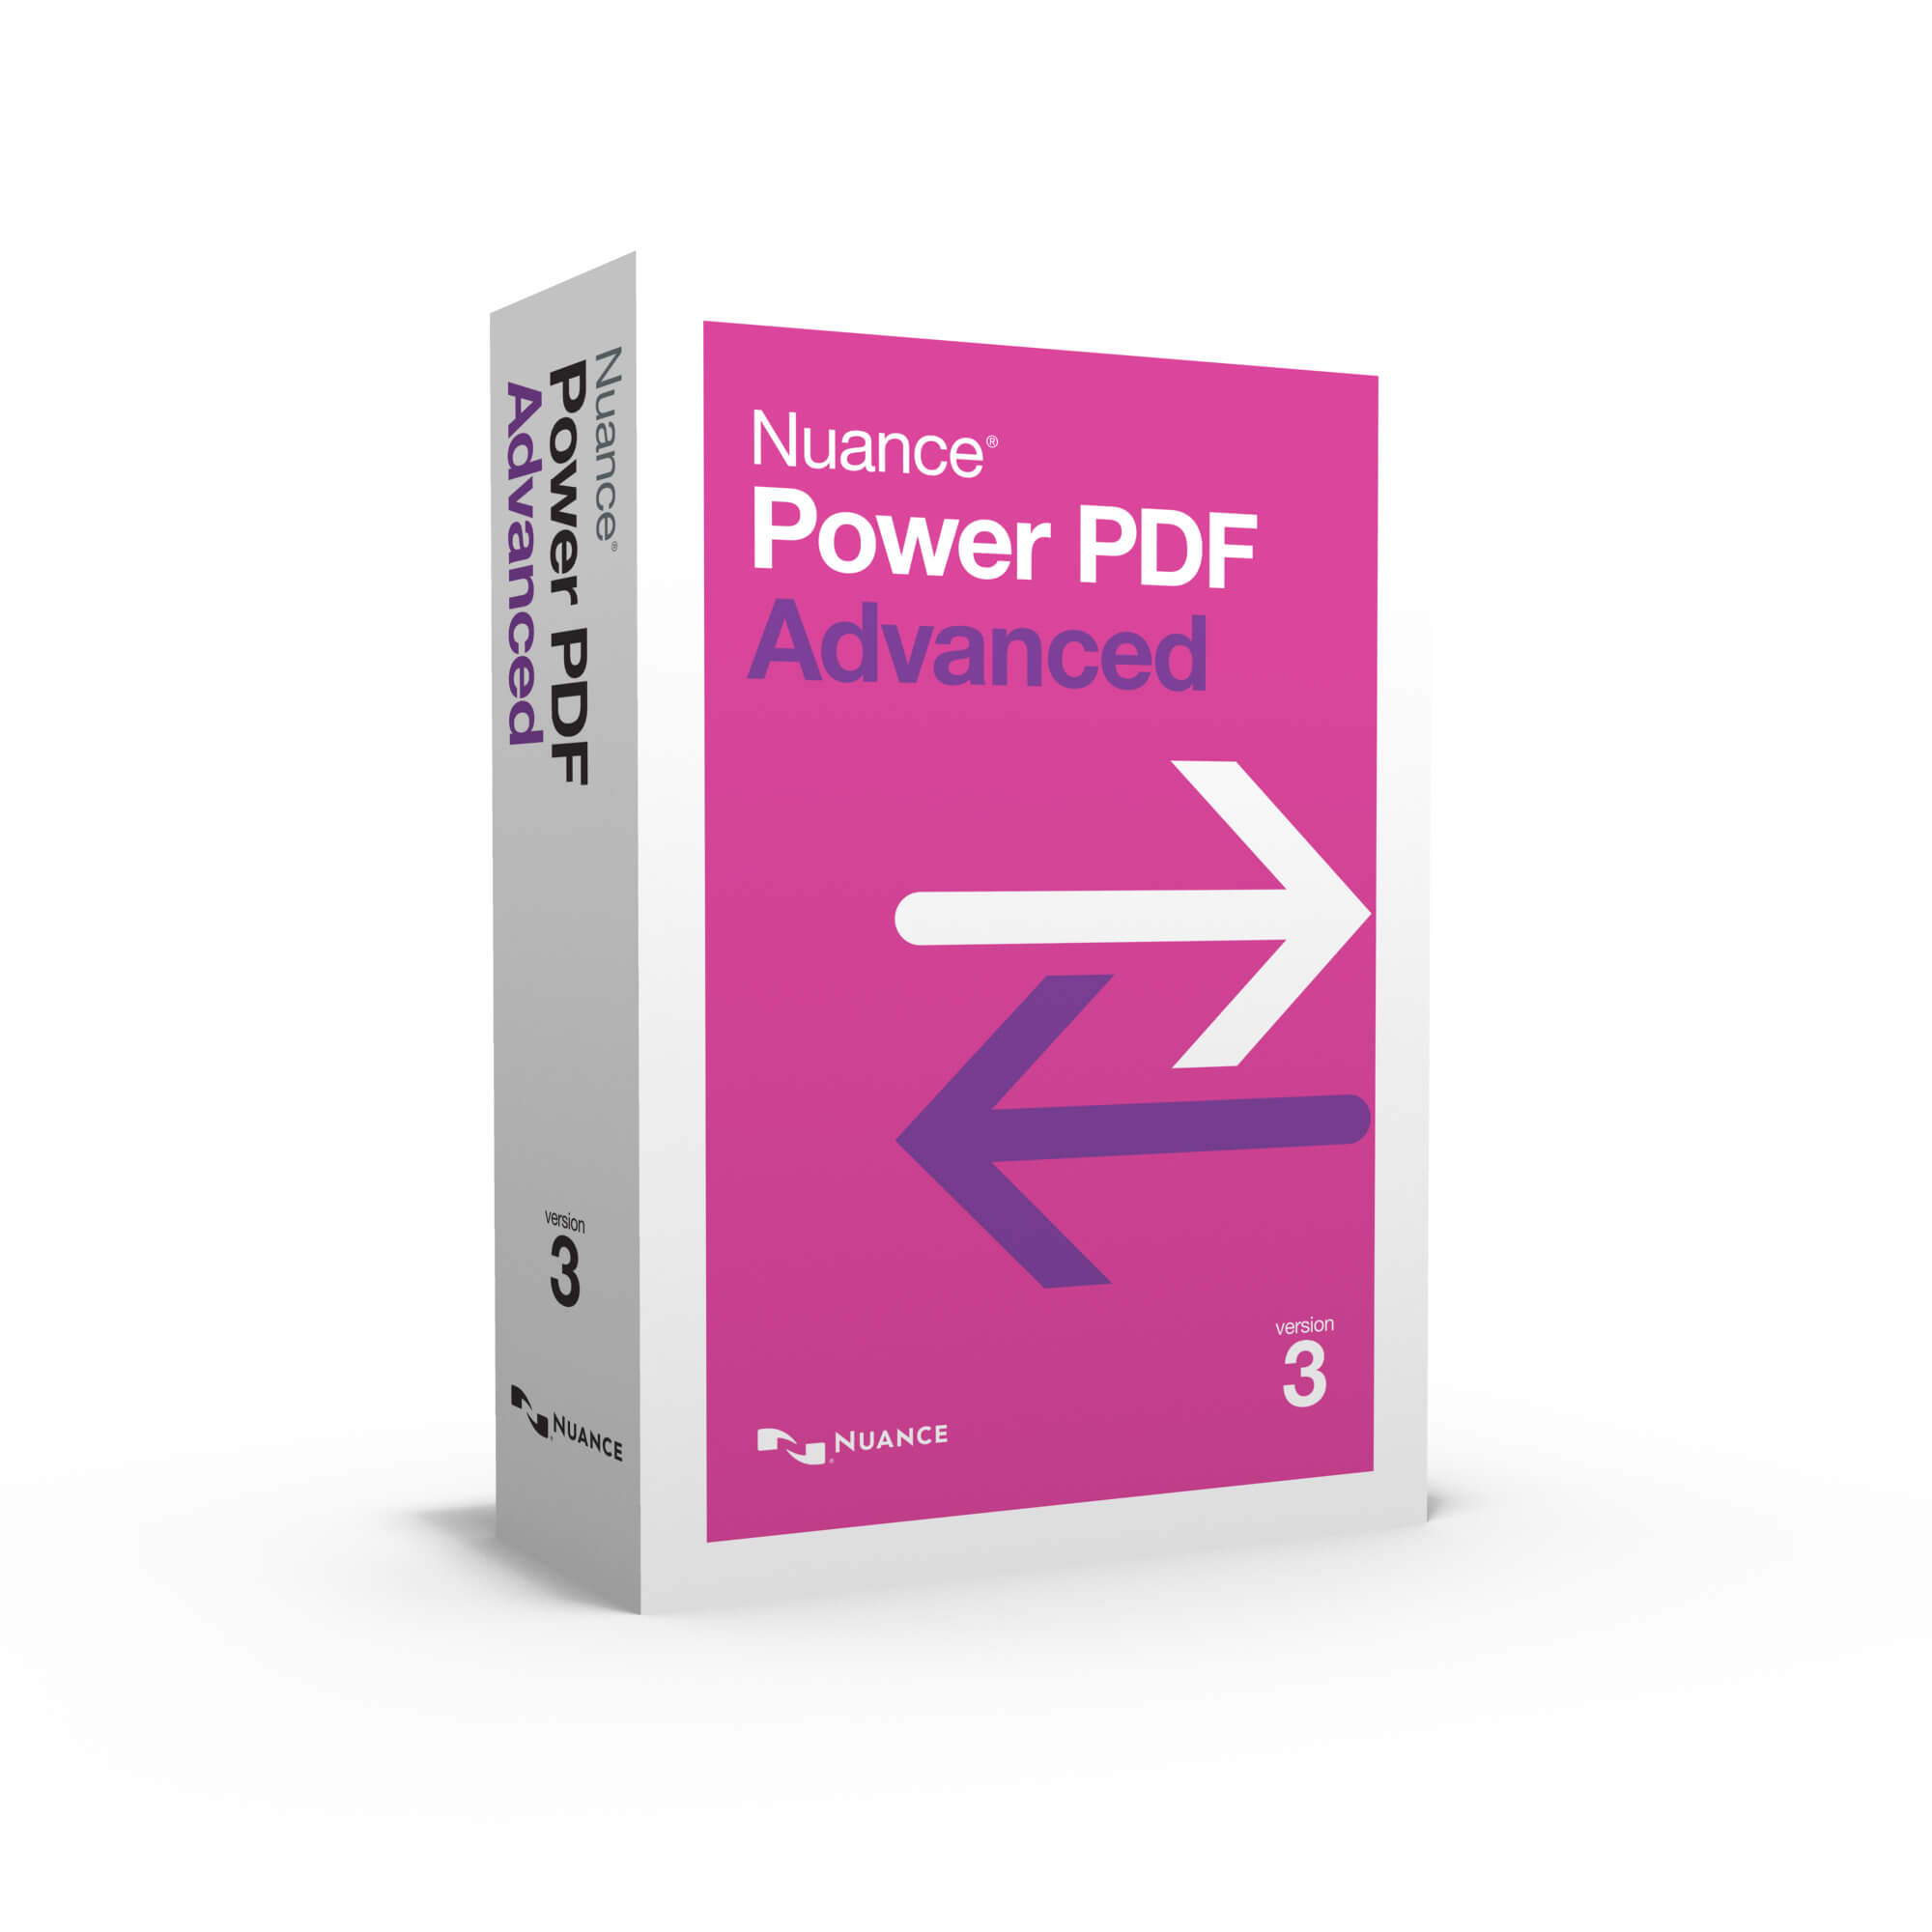 Nuance pdf advanced download ryan oreilly juniper networks